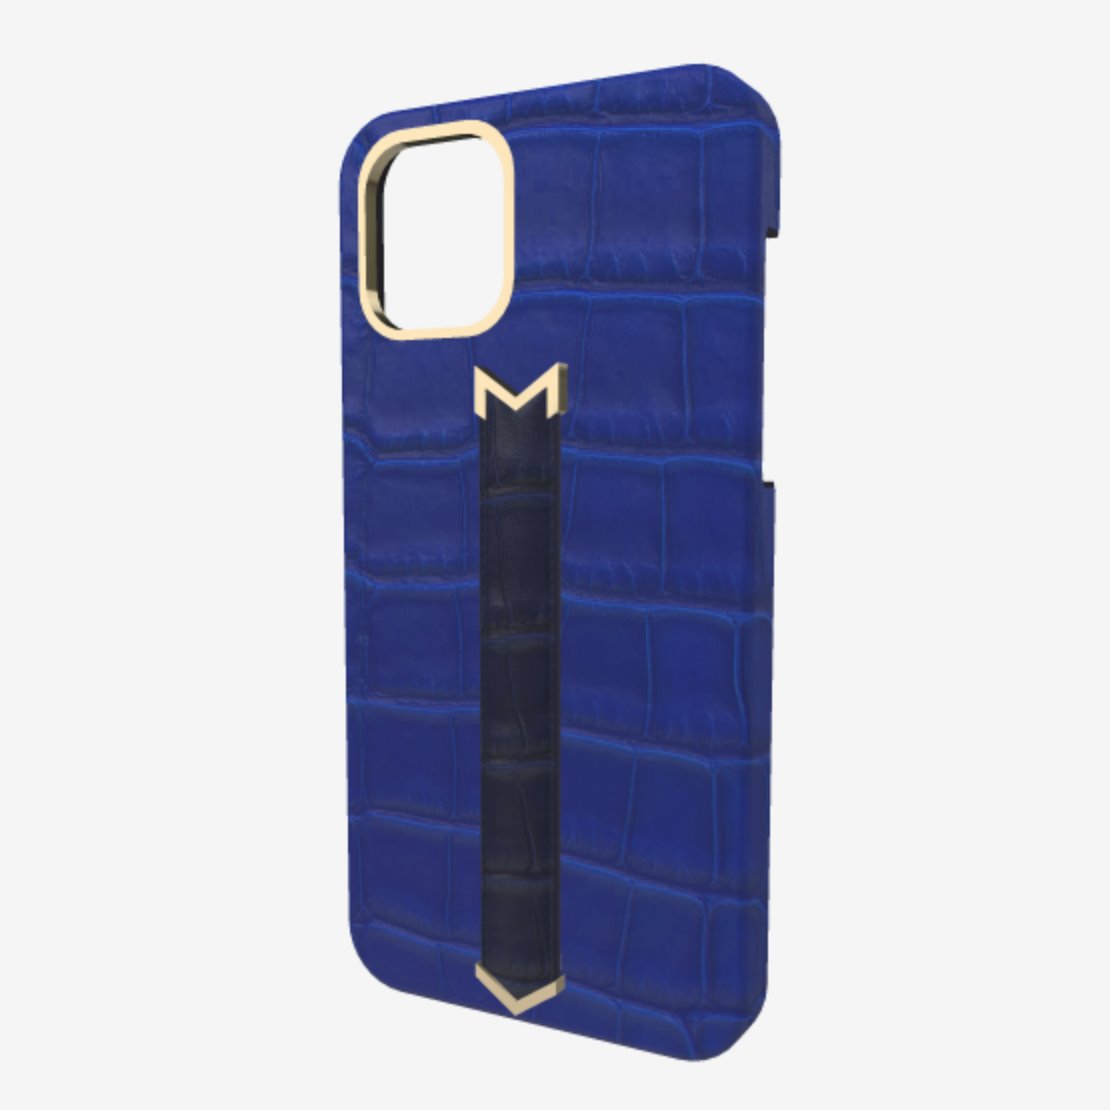 Gold Finger Strap Case for iPhone 13 Pro Max in Genuine Alligator Electric Blue Navy Blue 